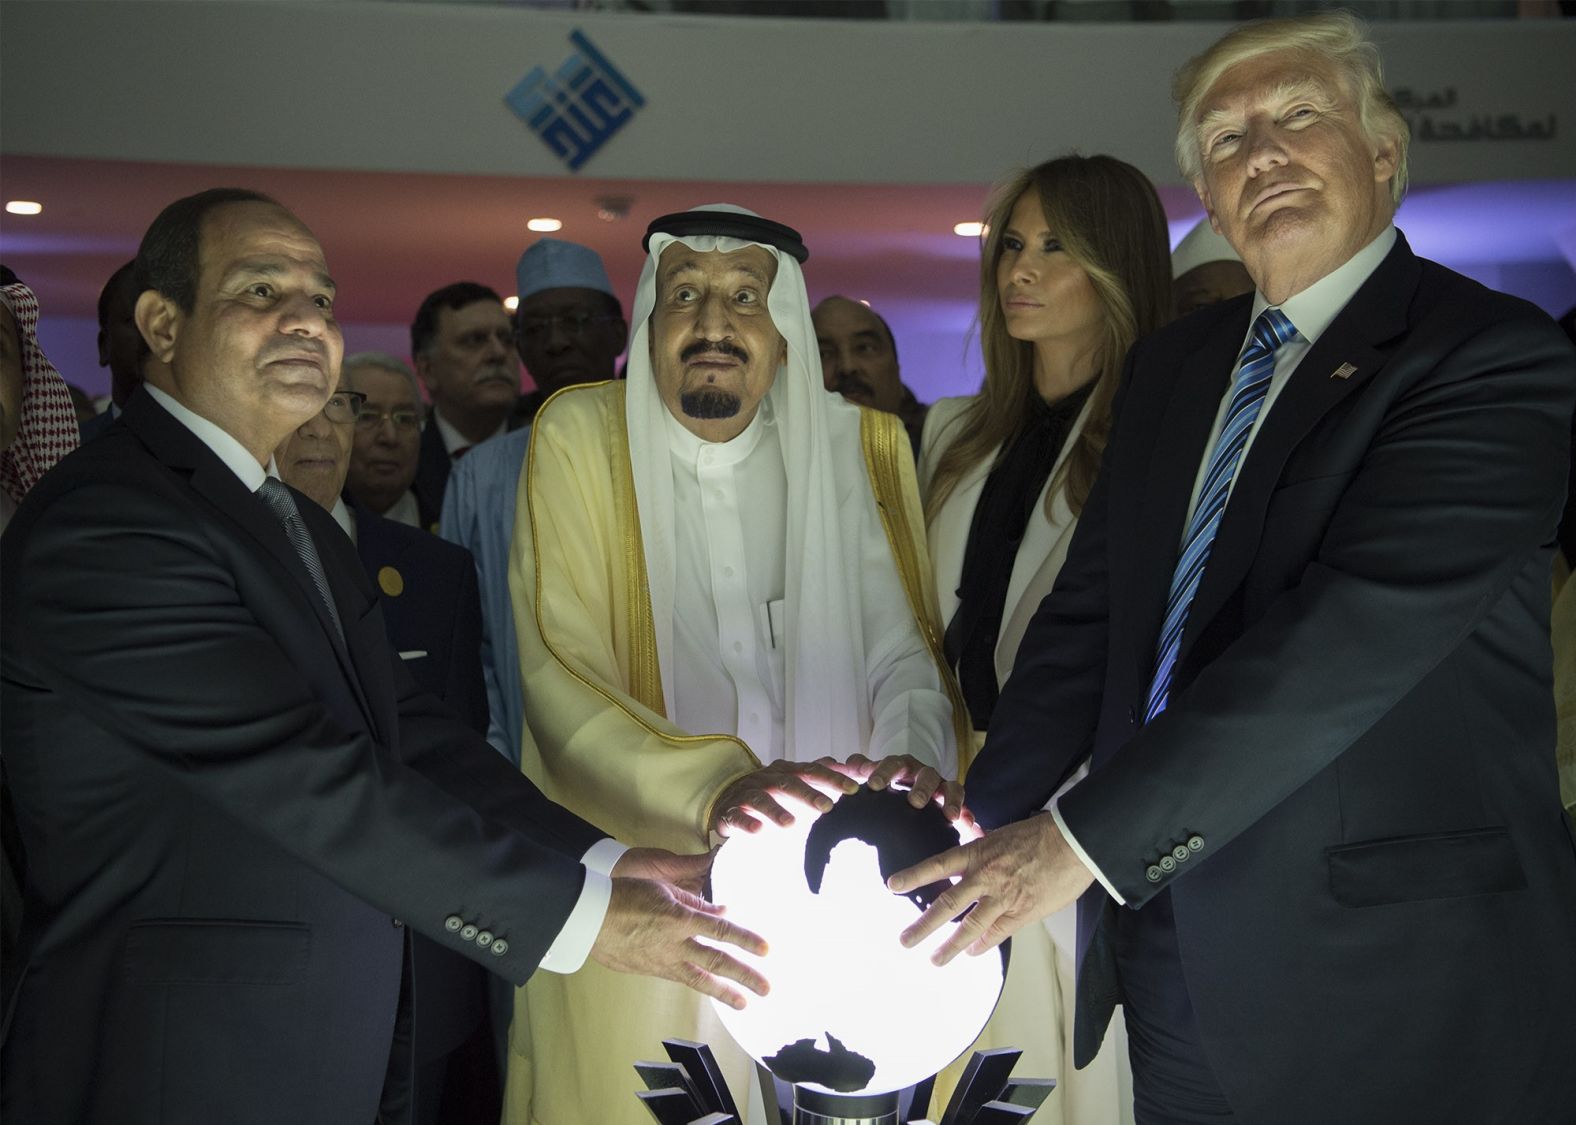 From right, President Trump, first lady Melania Trump, Saudi King Salman bin Abdulaziz Al Saud and Egyptian President Abdel Fattah el-Sisi attend an inauguration ceremony for the Global Center for Combating Extremist Ideology. The facility is in Riyadh, Saudi Arabia. <a href="index.php?page=&url=http%3A%2F%2Fwww.cnn.com%2F2017%2F05%2F20%2Fpolitics%2Fgallery%2Ftrump-first-foreign-trip%2Findex.html" target="_blank">See more photos from Trump's first foreign tour in May 2017</a>